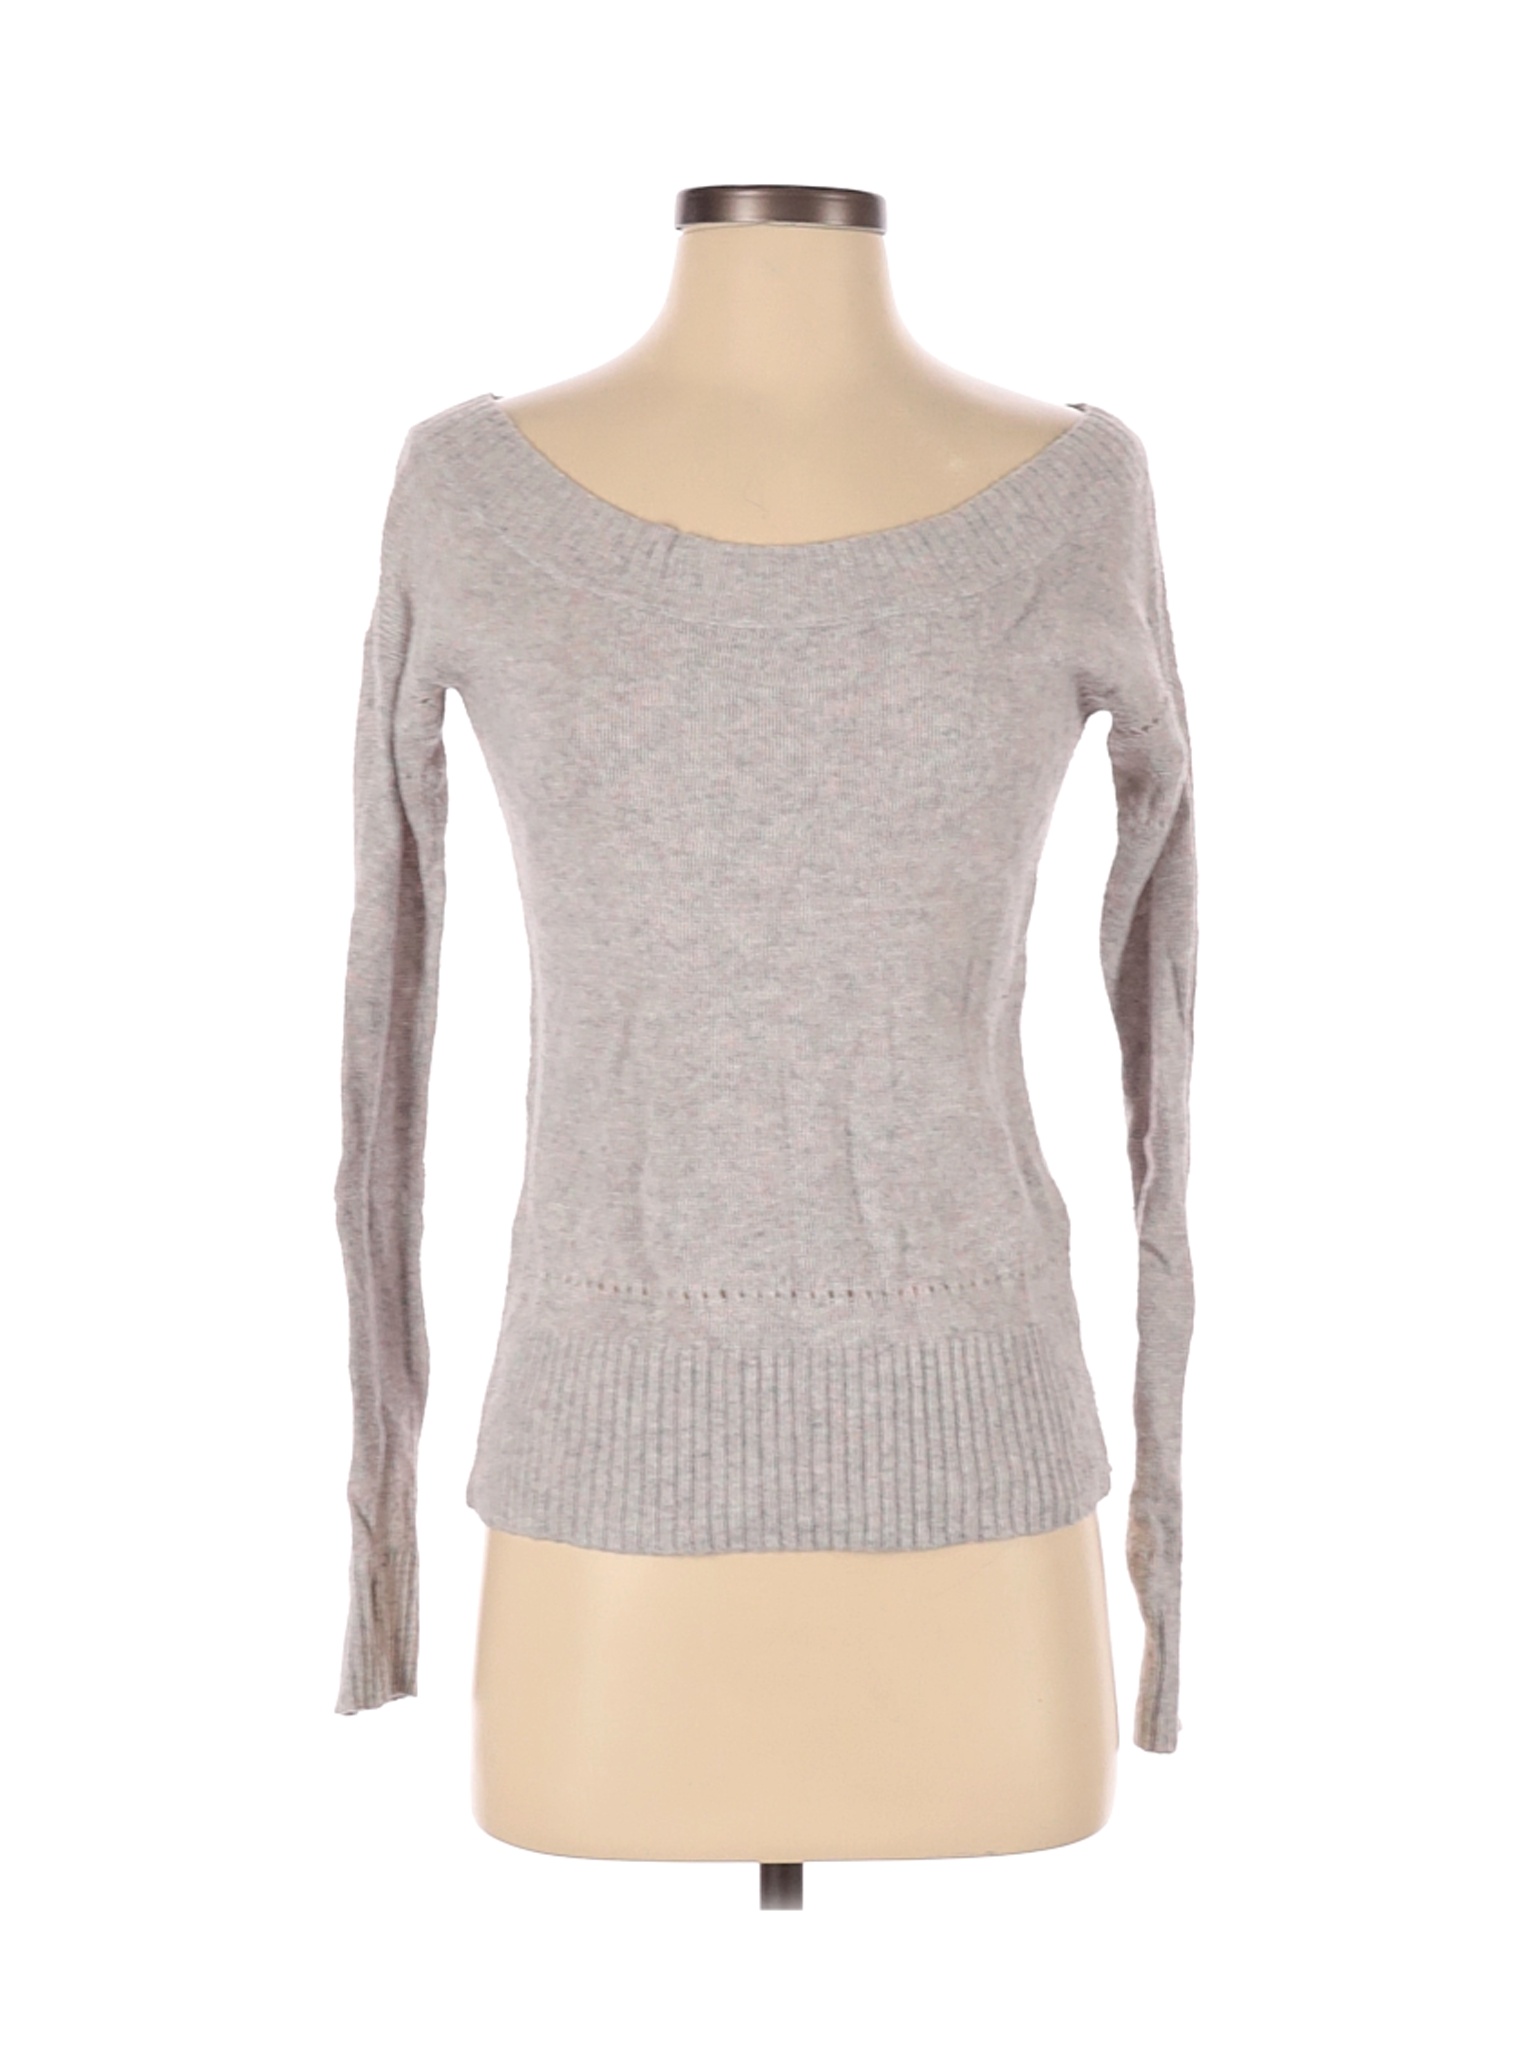 American Eagle Outfitters Women Gray Pullover Sweater S | eBay